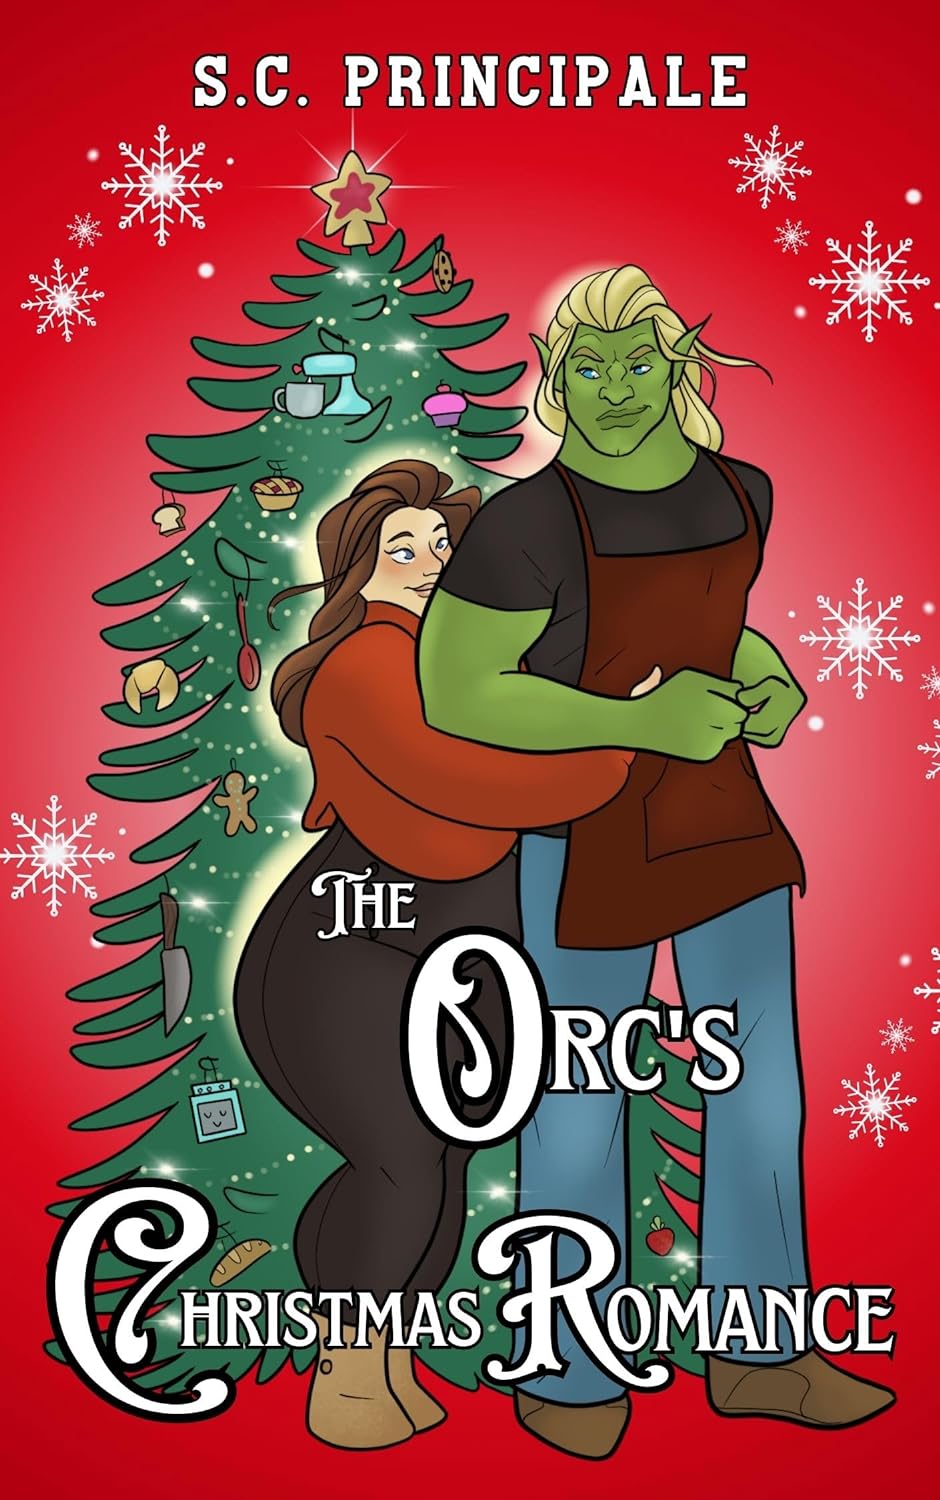 The Orc’s Christmas Romance by S.C. Principale